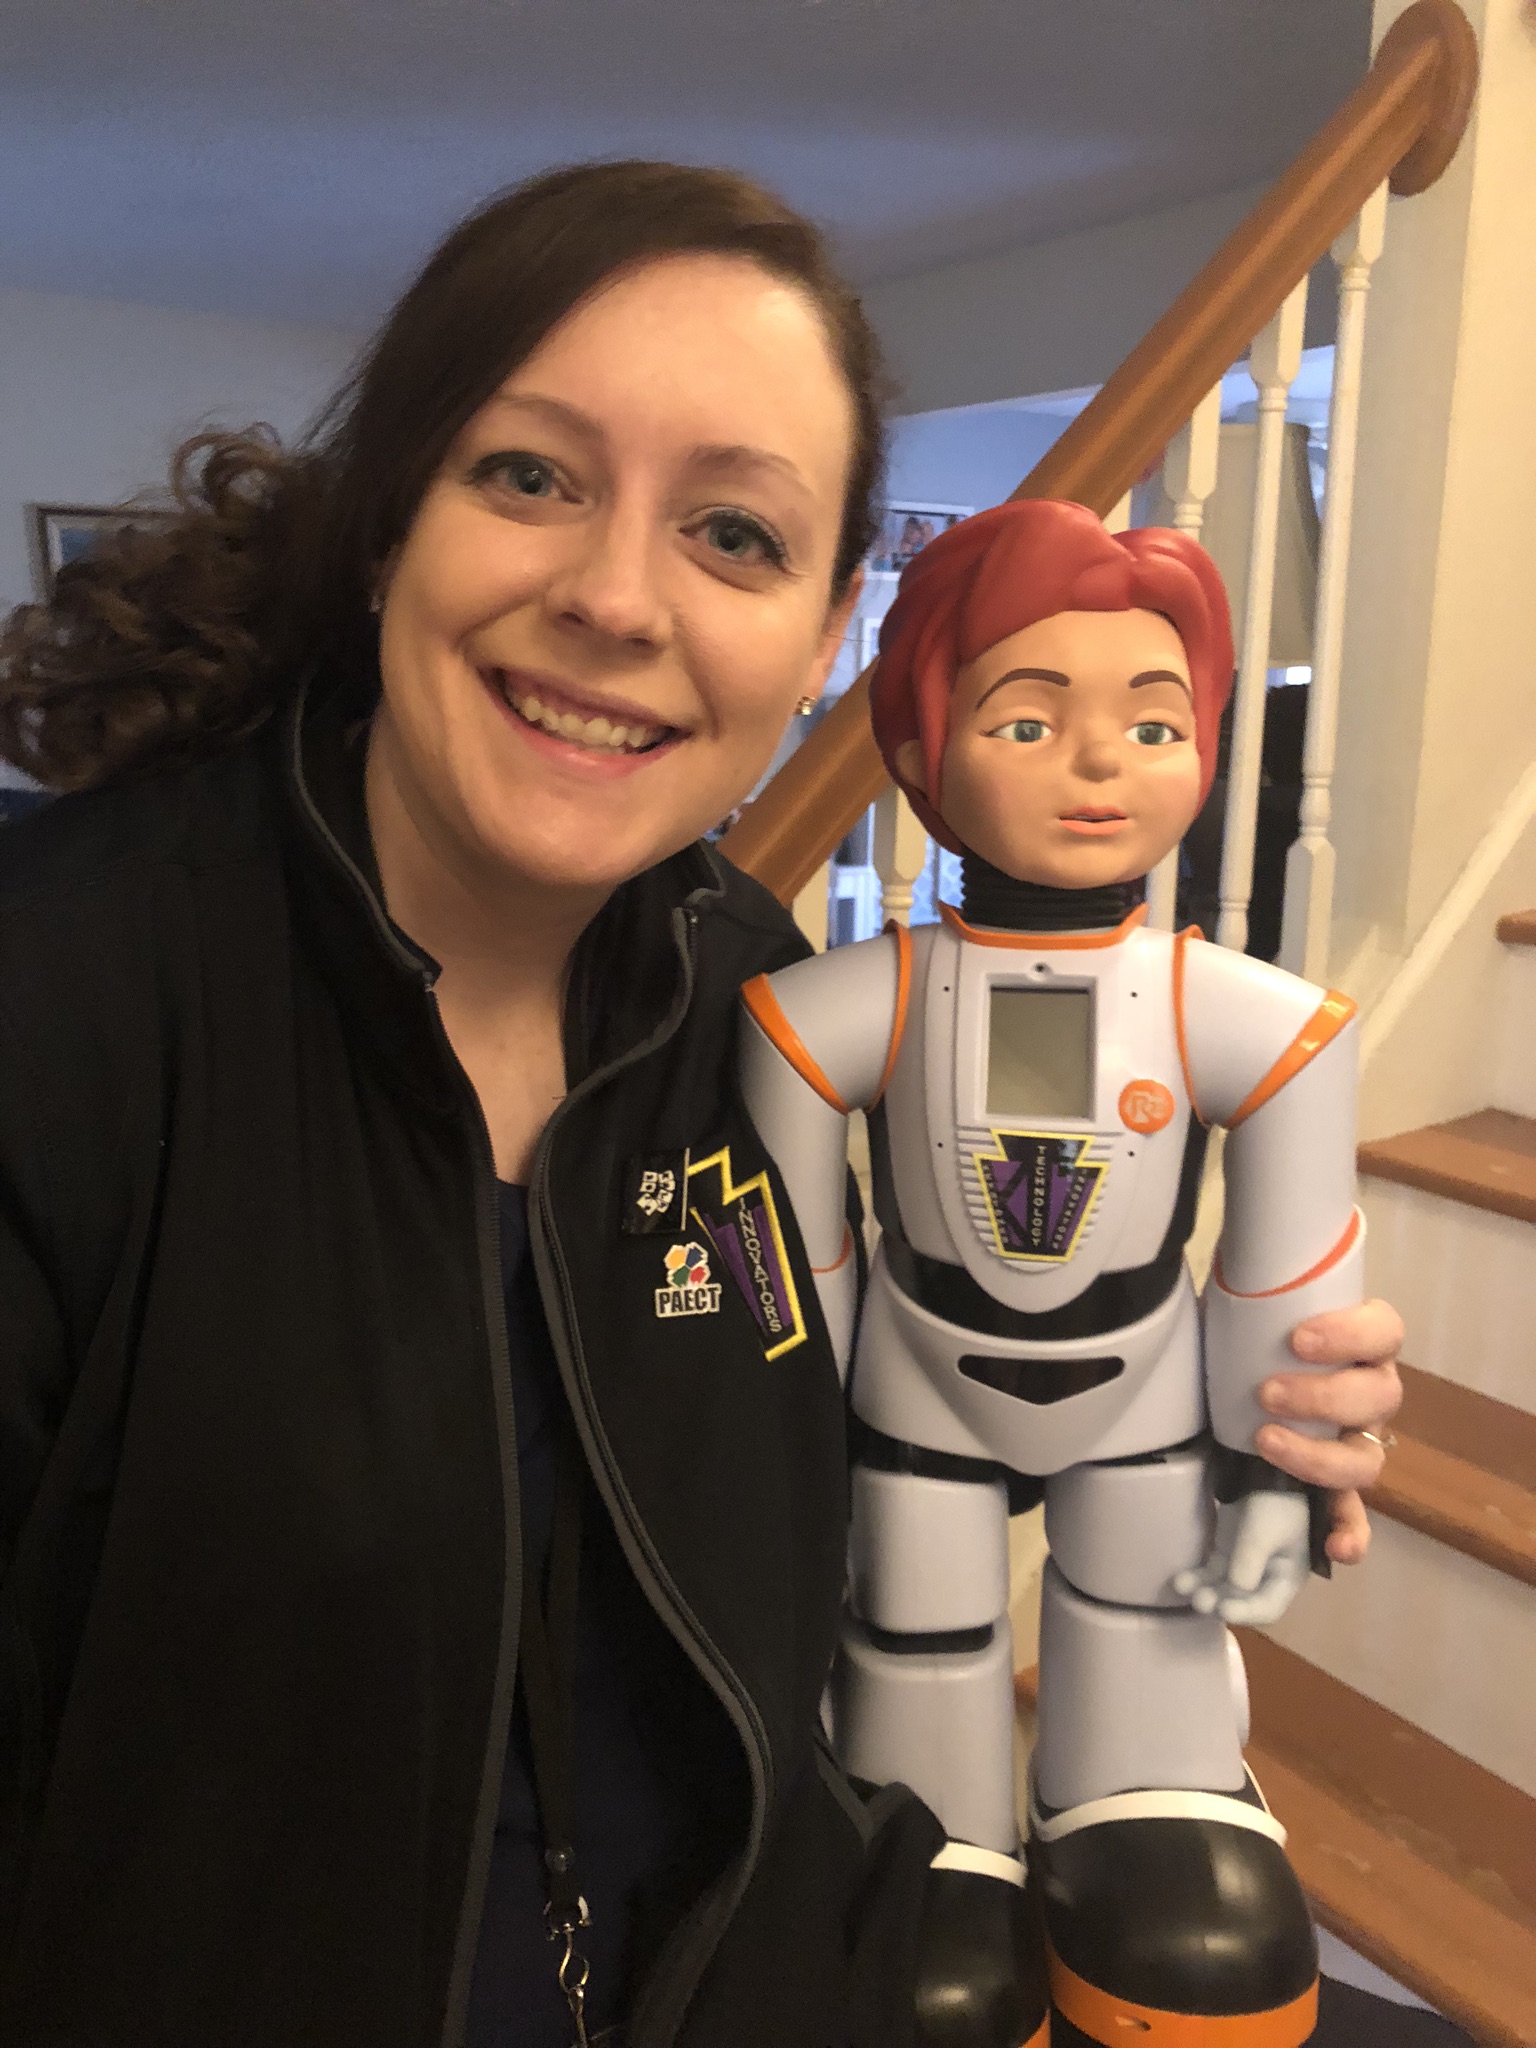 Dr. Redcay posing with the femaile humanoid named Robon.